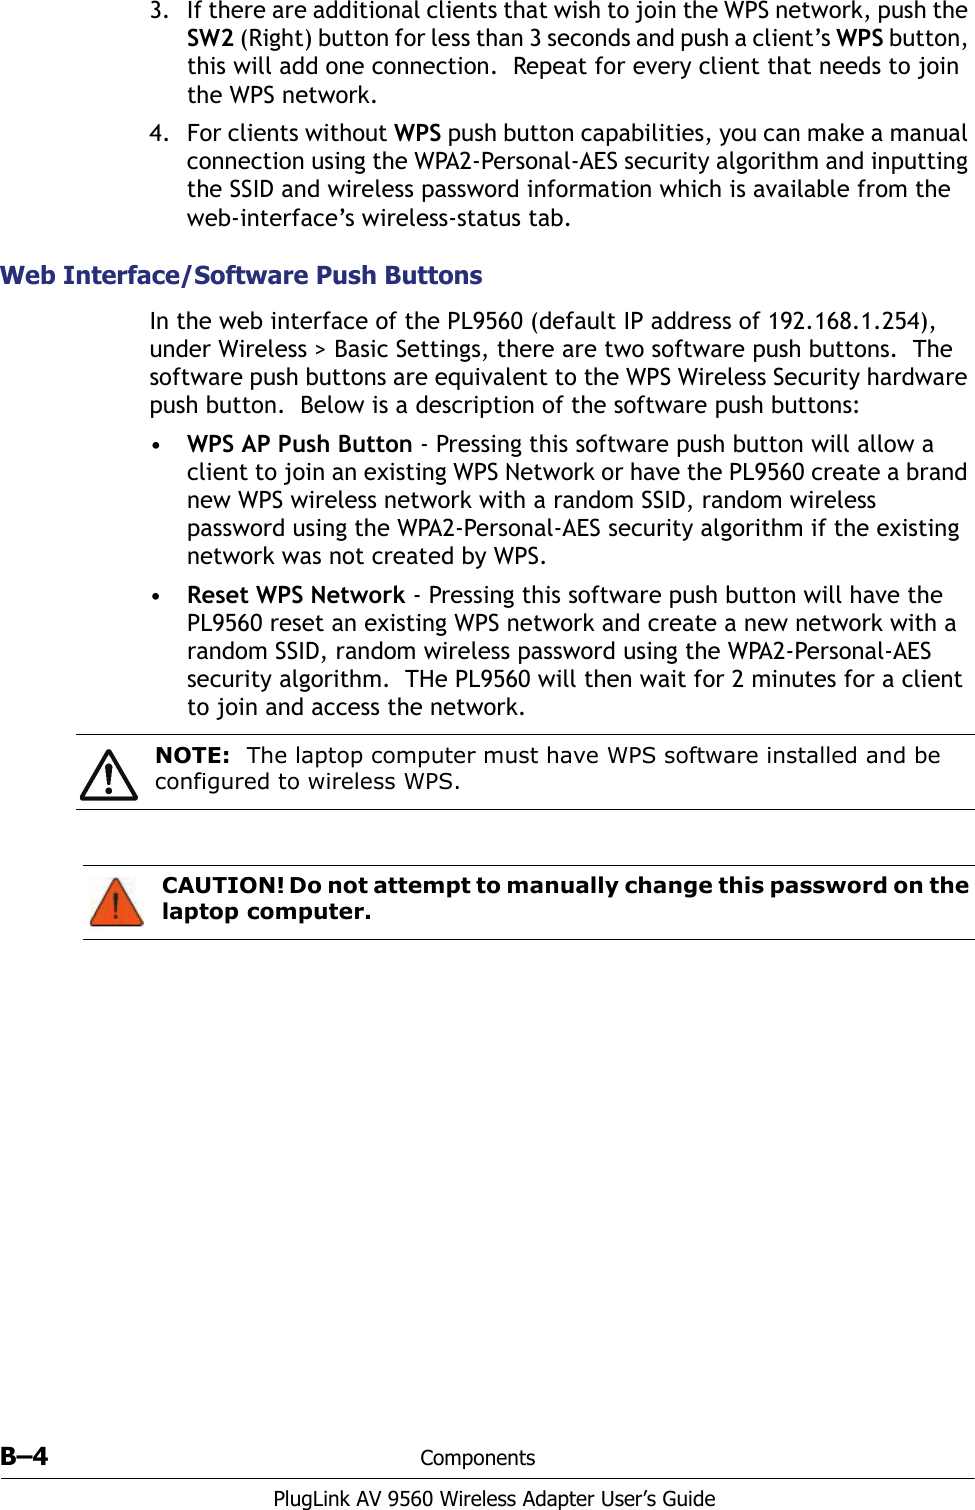 B–4 ComponentsPlugLink AV 9560 Wireless Adapter User’s Guide3. If there are additional clients that wish to join the WPS network, push the SW2 (Right) button for less than 3 seconds and push a client’s WPS button, this will add one connection.  Repeat for every client that needs to join the WPS network.4. For clients without WPS push button capabilities, you can make a manual connection using the WPA2-Personal-AES security algorithm and inputting the SSID and wireless password information which is available from the web-interface’s wireless-status tab. Web Interface/Software Push ButtonsIn the web interface of the PL9560 (default IP address of 192.168.1.254), under Wireless &gt; Basic Settings, there are two software push buttons.  The software push buttons are equivalent to the WPS Wireless Security hardware push button.  Below is a description of the software push buttons:•WPS AP Push Button - Pressing this software push button will allow a client to join an existing WPS Network or have the PL9560 create a brand new WPS wireless network with a random SSID, random wireless password using the WPA2-Personal-AES security algorithm if the existing network was not created by WPS. •Reset WPS Network - Pressing this software push button will have the PL9560 reset an existing WPS network and create a new network with a random SSID, random wireless password using the WPA2-Personal-AES security algorithm.  THe PL9560 will then wait for 2 minutes for a client to join and access the network. NOTE: The laptop computer must have WPS software installed and be configured to wireless WPS. CAUTION! Do not attempt to manually change this password on the laptop computer. 